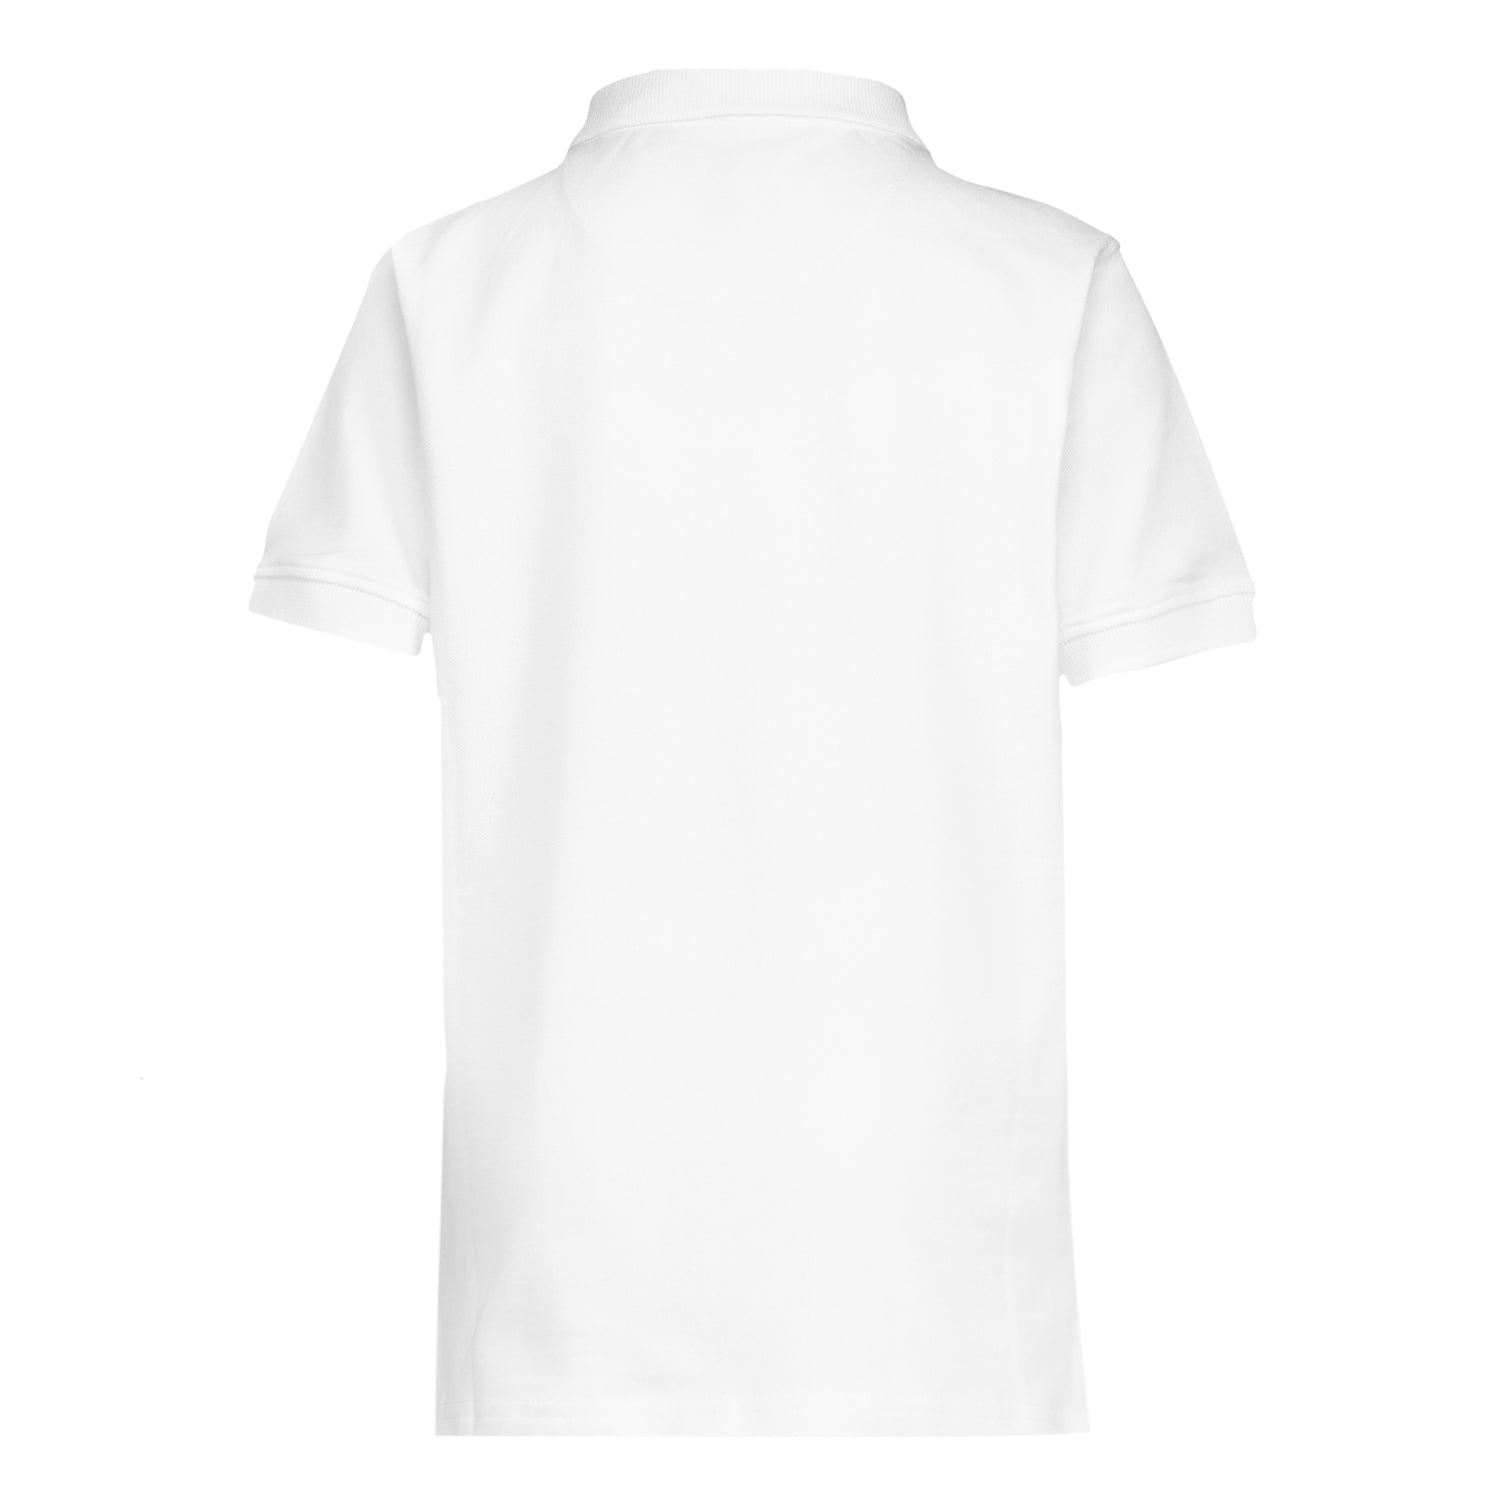 Youth ECO Essentials Real Madrid Color Crest Polo White